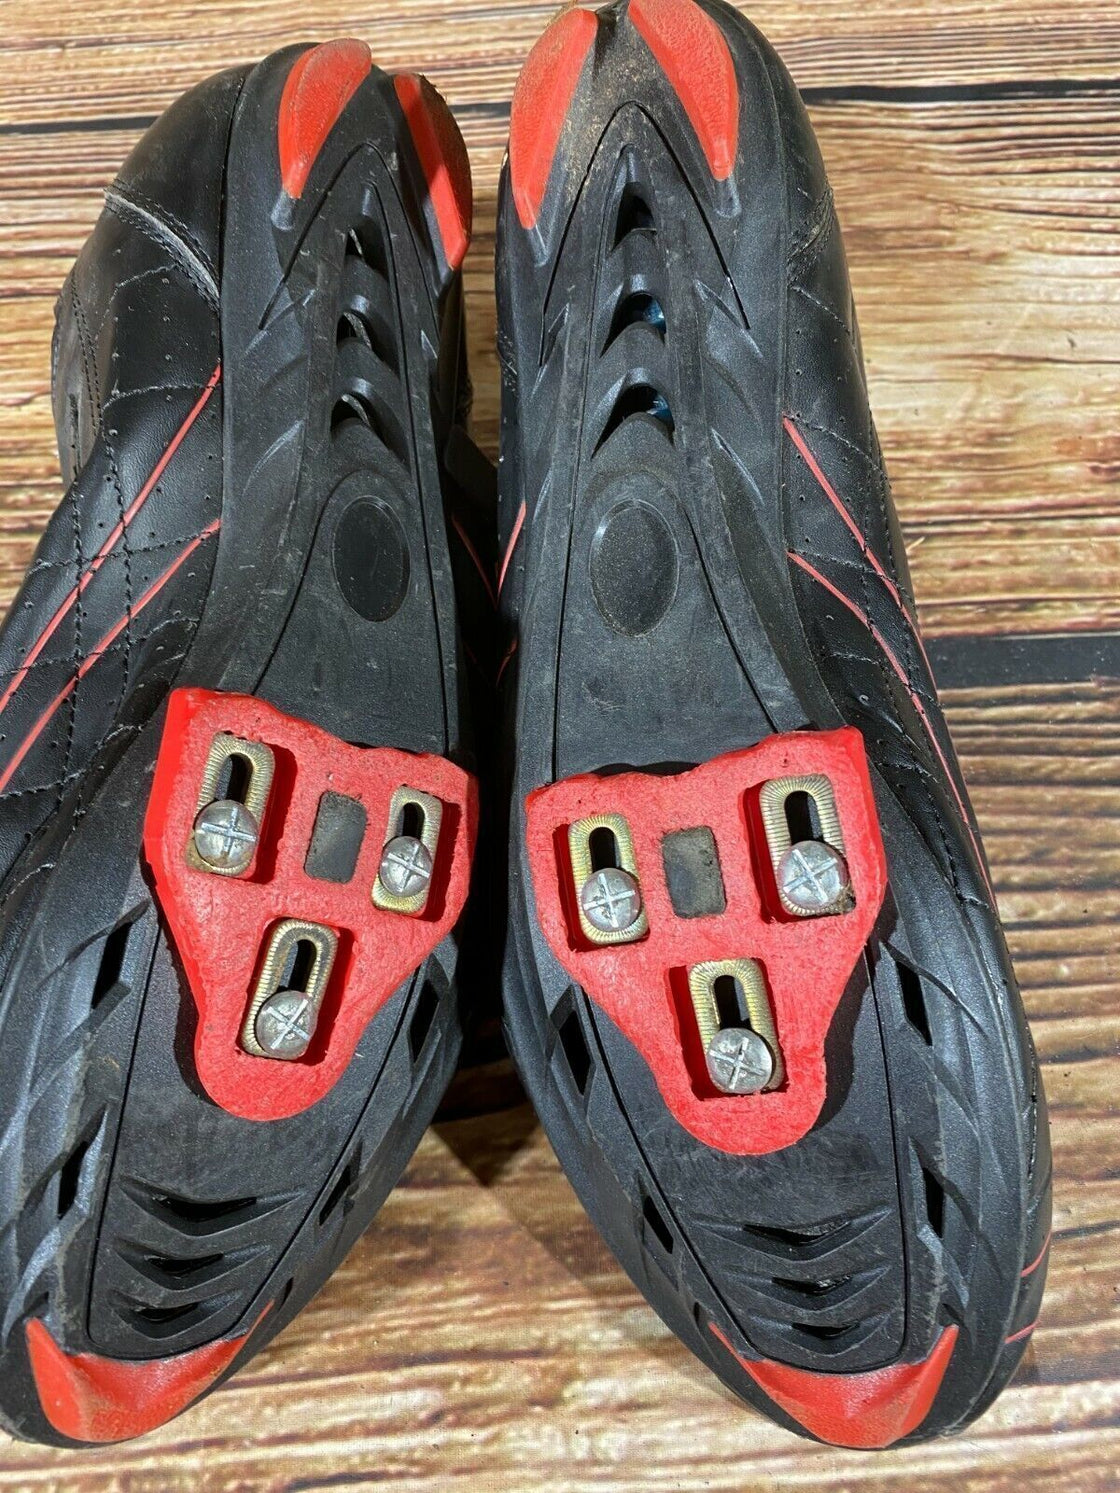 ROSE Road Cycling Shoes 3 Bolts Size EU 48 With Cleats